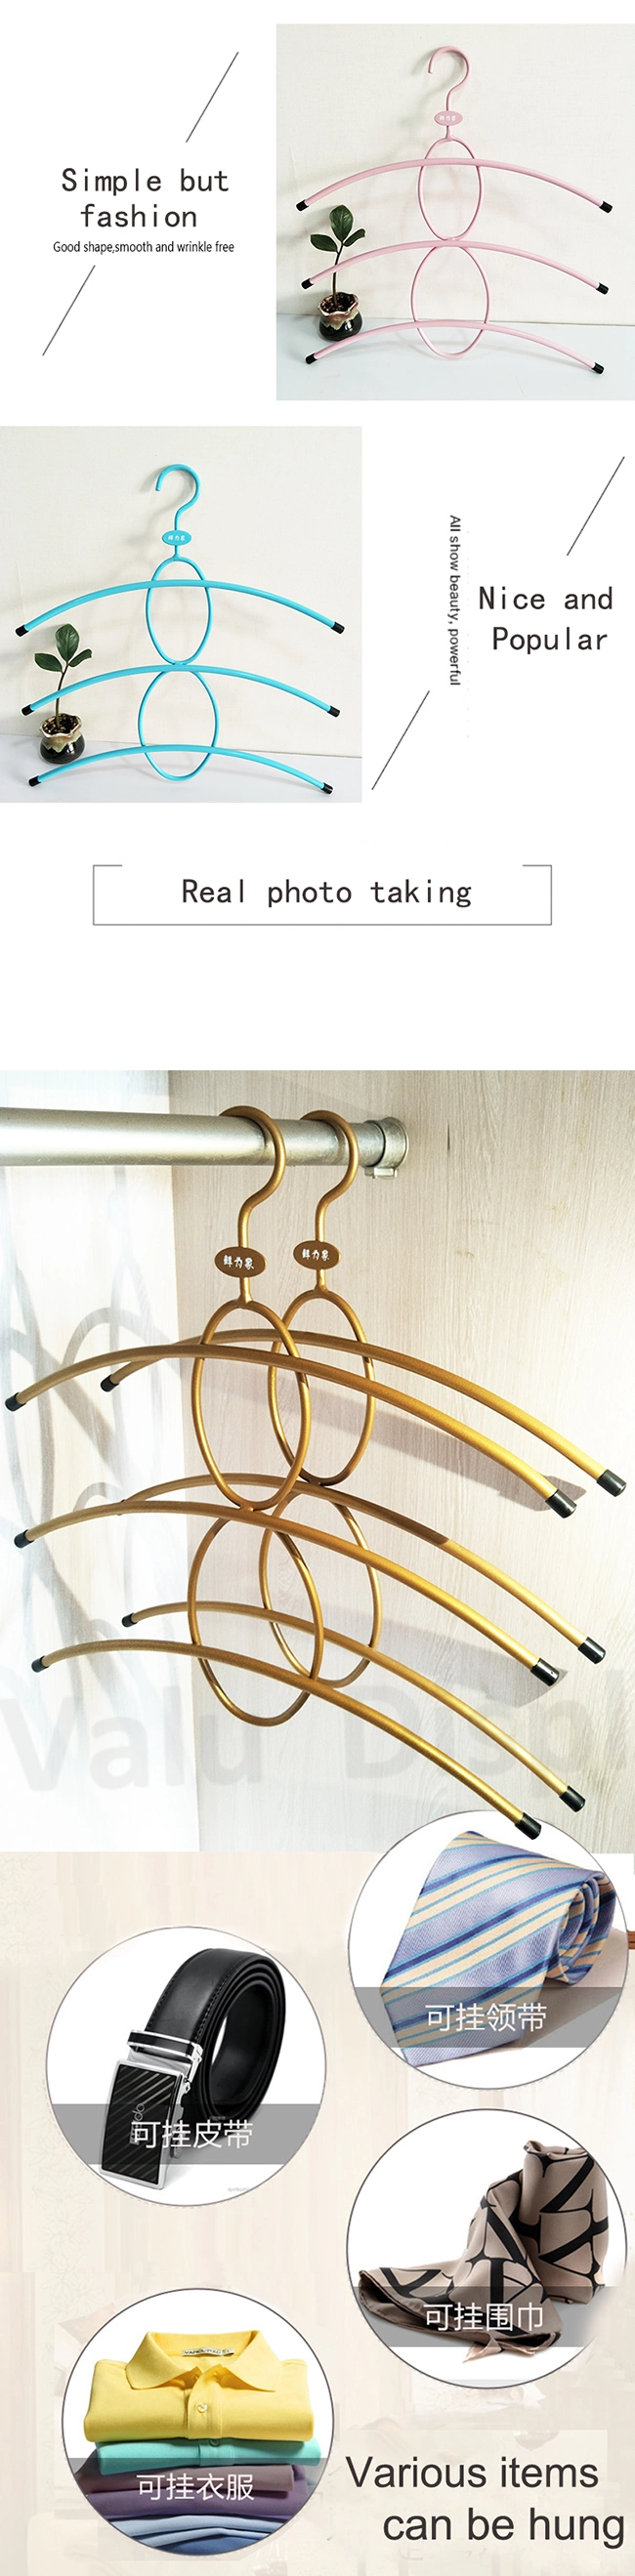 Hangers Closet Organizer Space Saving Magic Clothes Hangers Heavy Duty for Coat Suits Shirt Sweaters